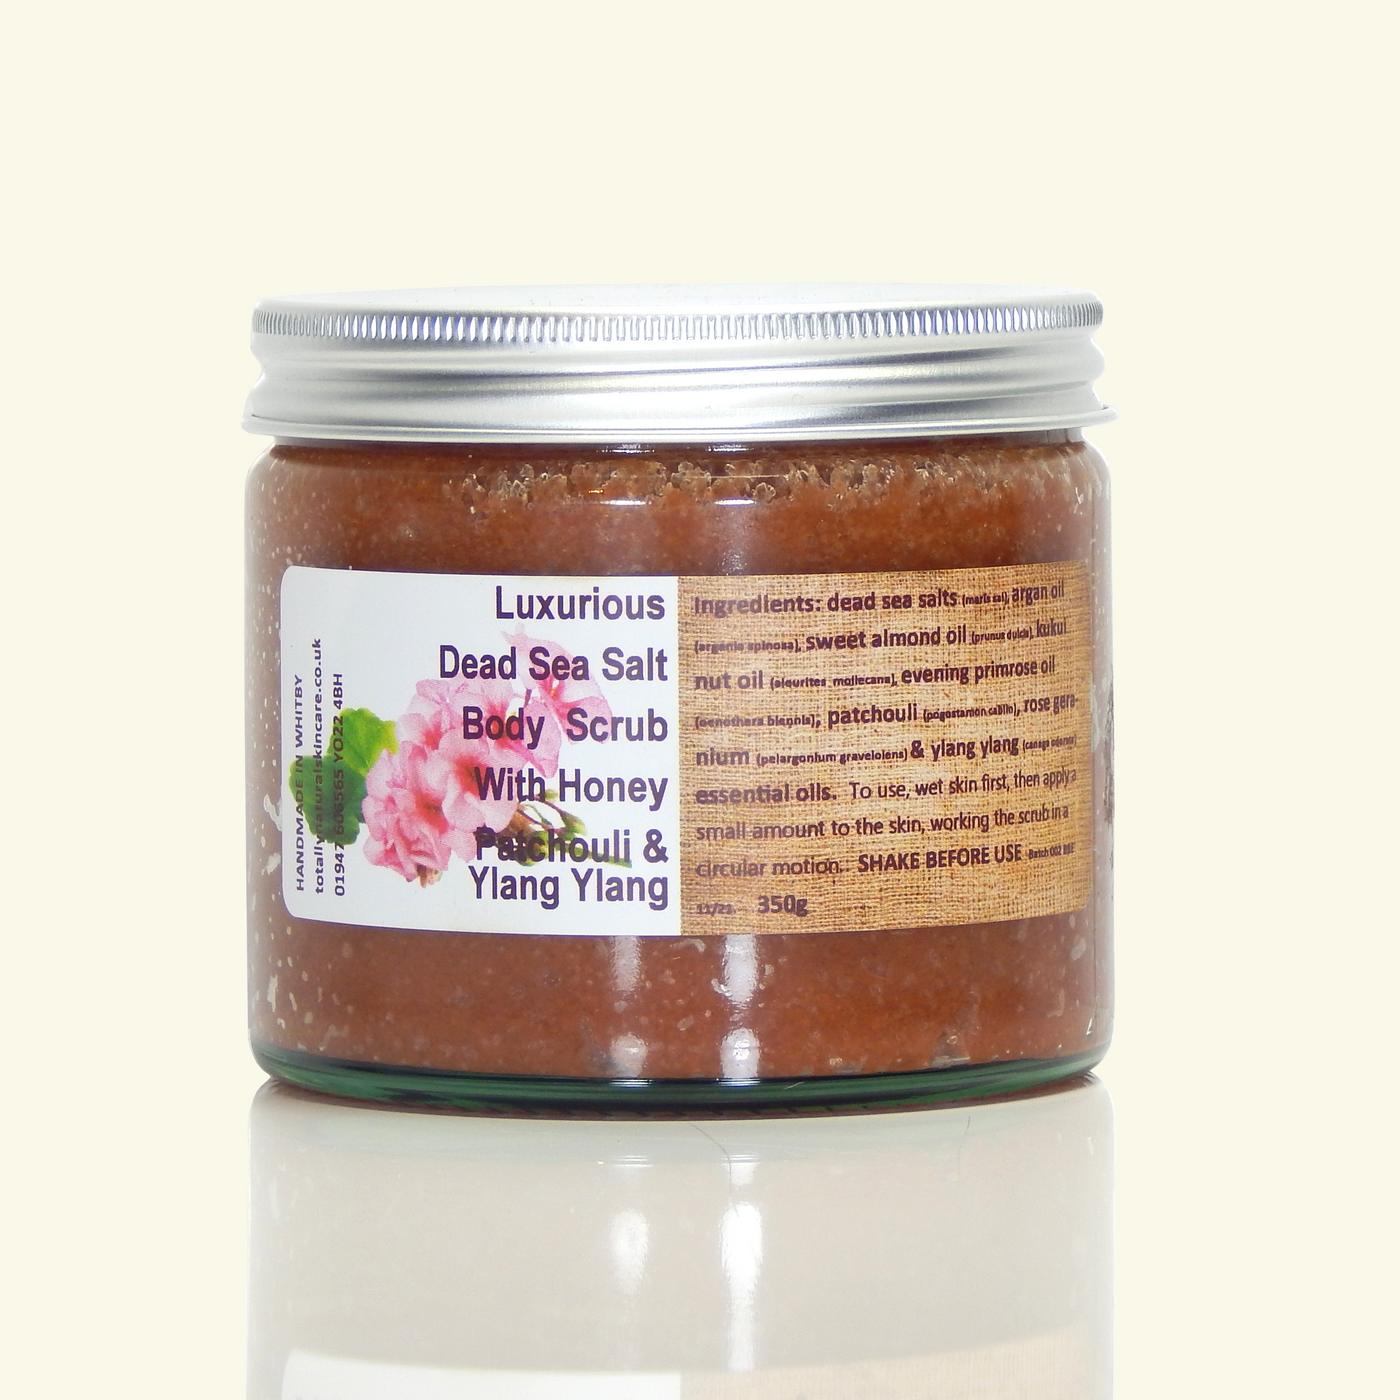 Luxurious Dead Sea Salt Body Scrub With Patchouli & Ylang Ylang